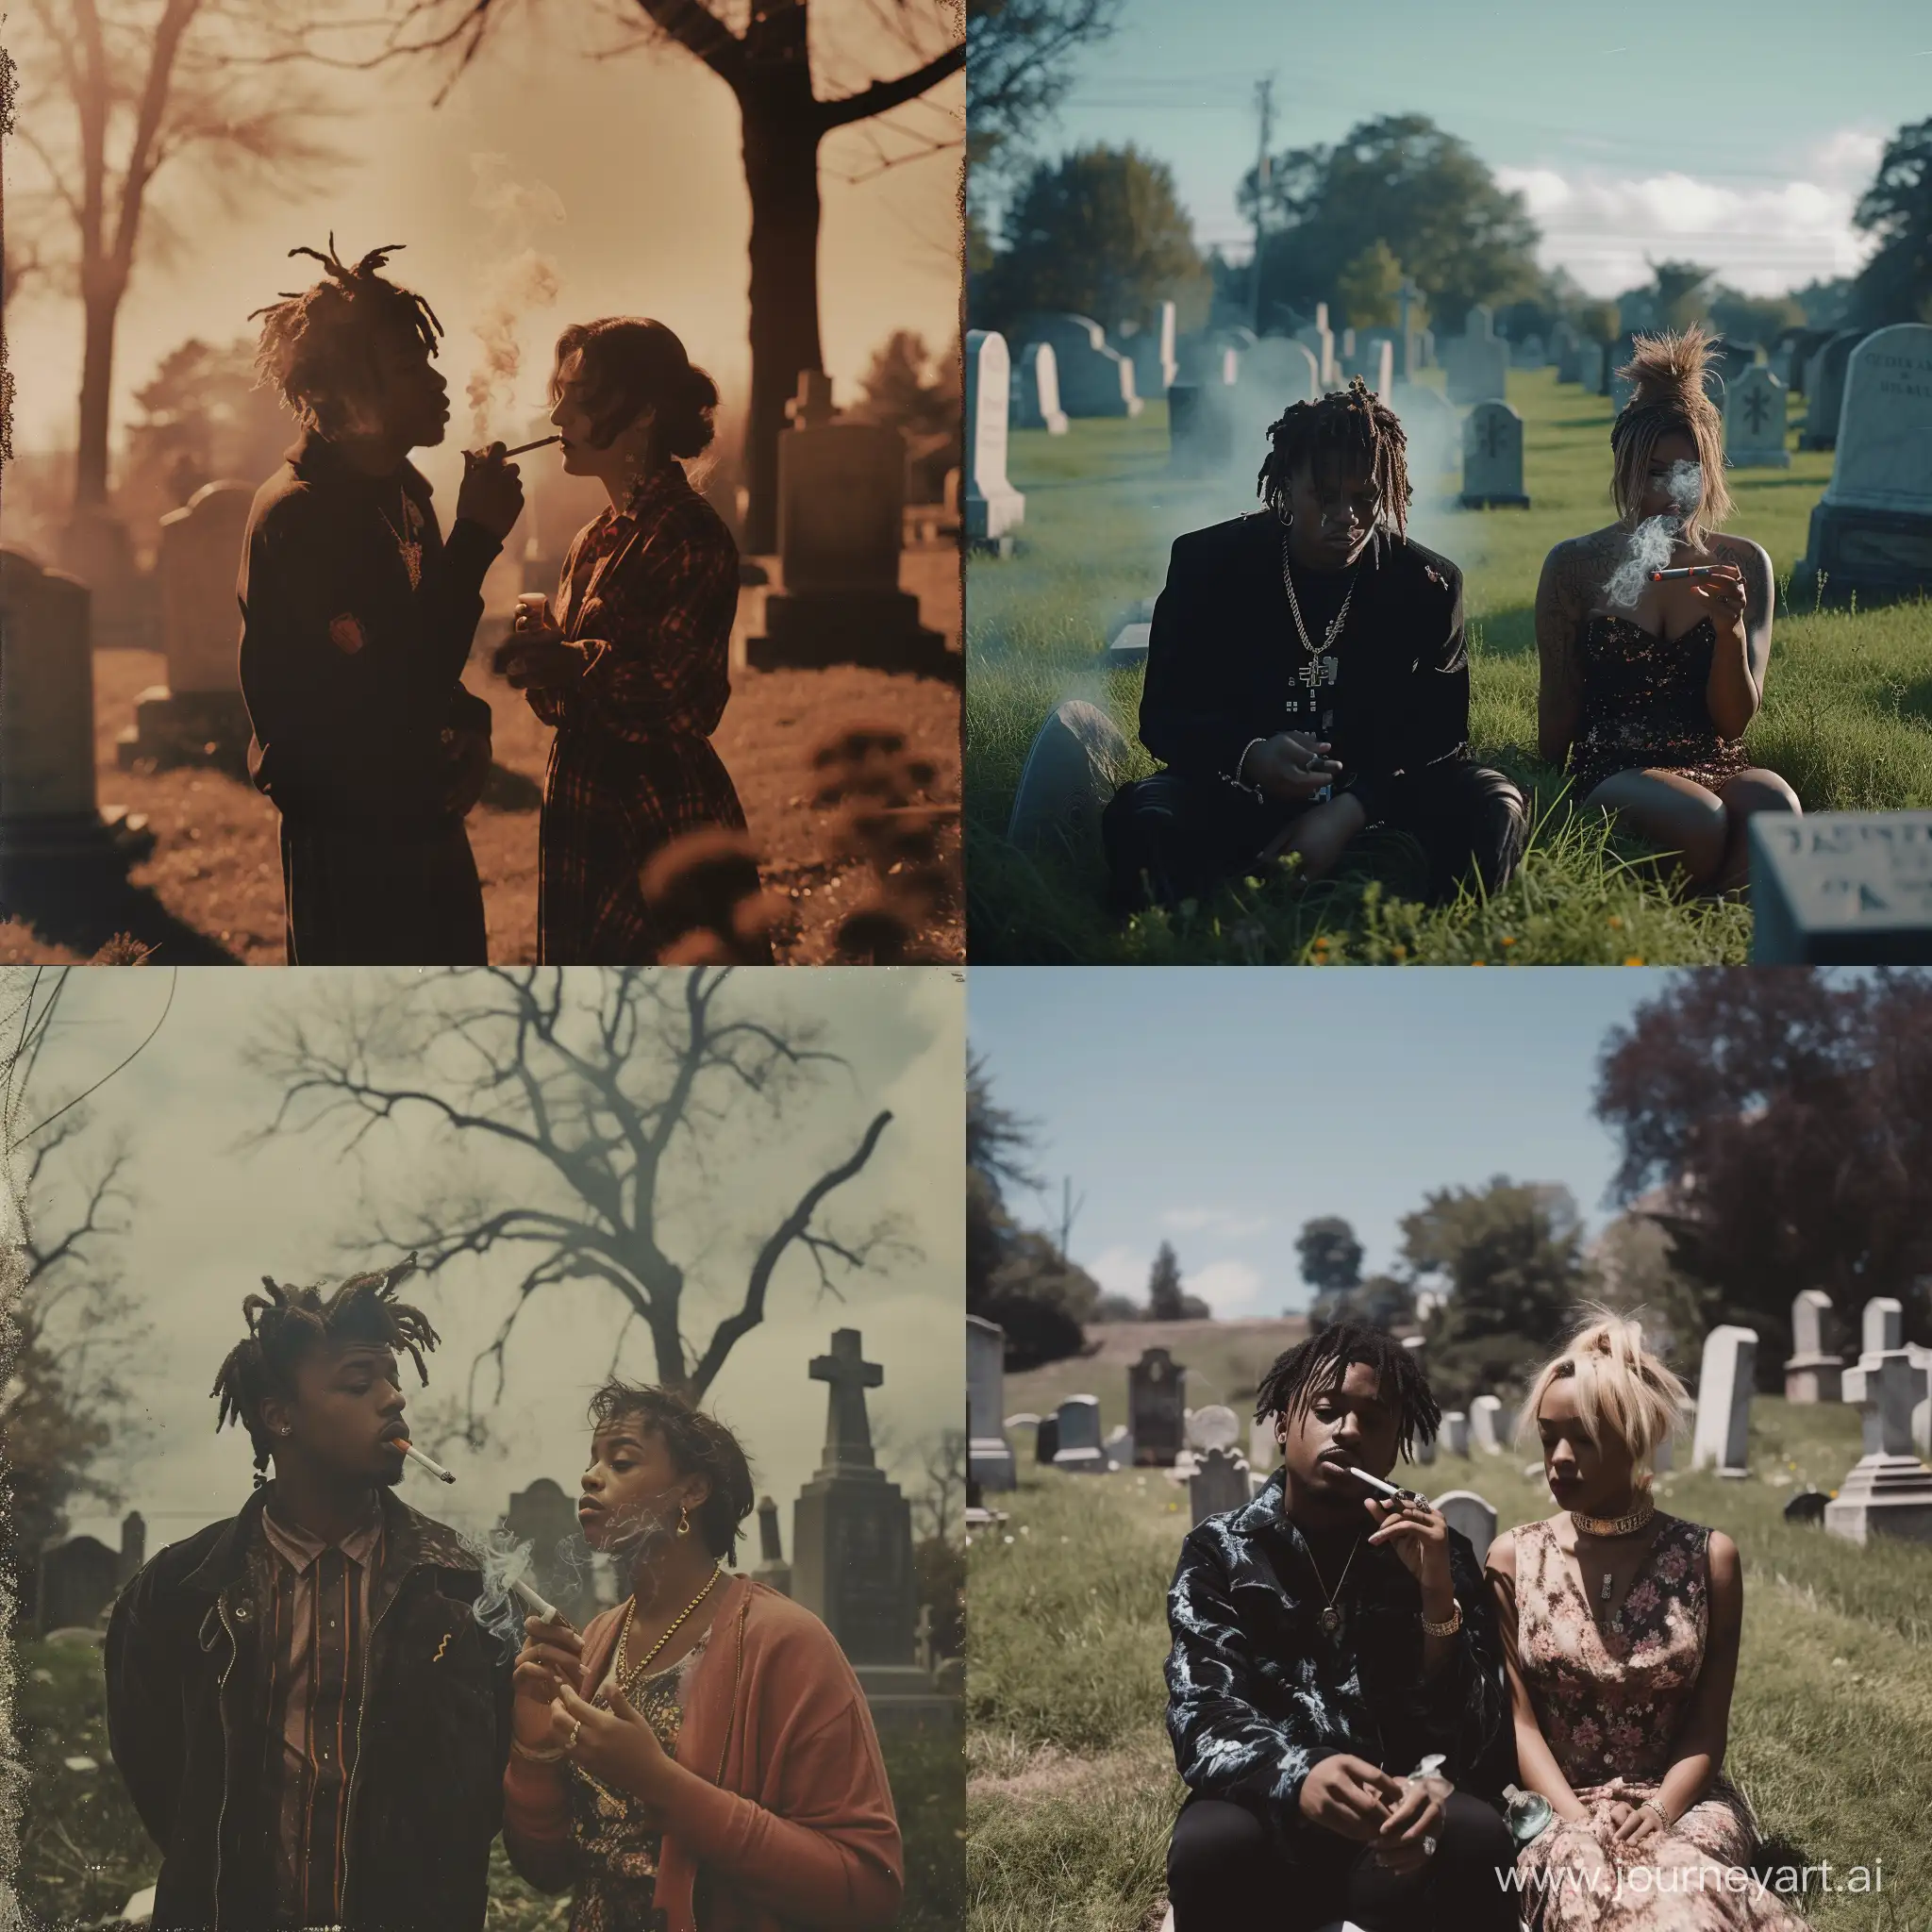 A 1950s Movie Scene of Juice WRLD Smoking with a Woman in the Cemetery.